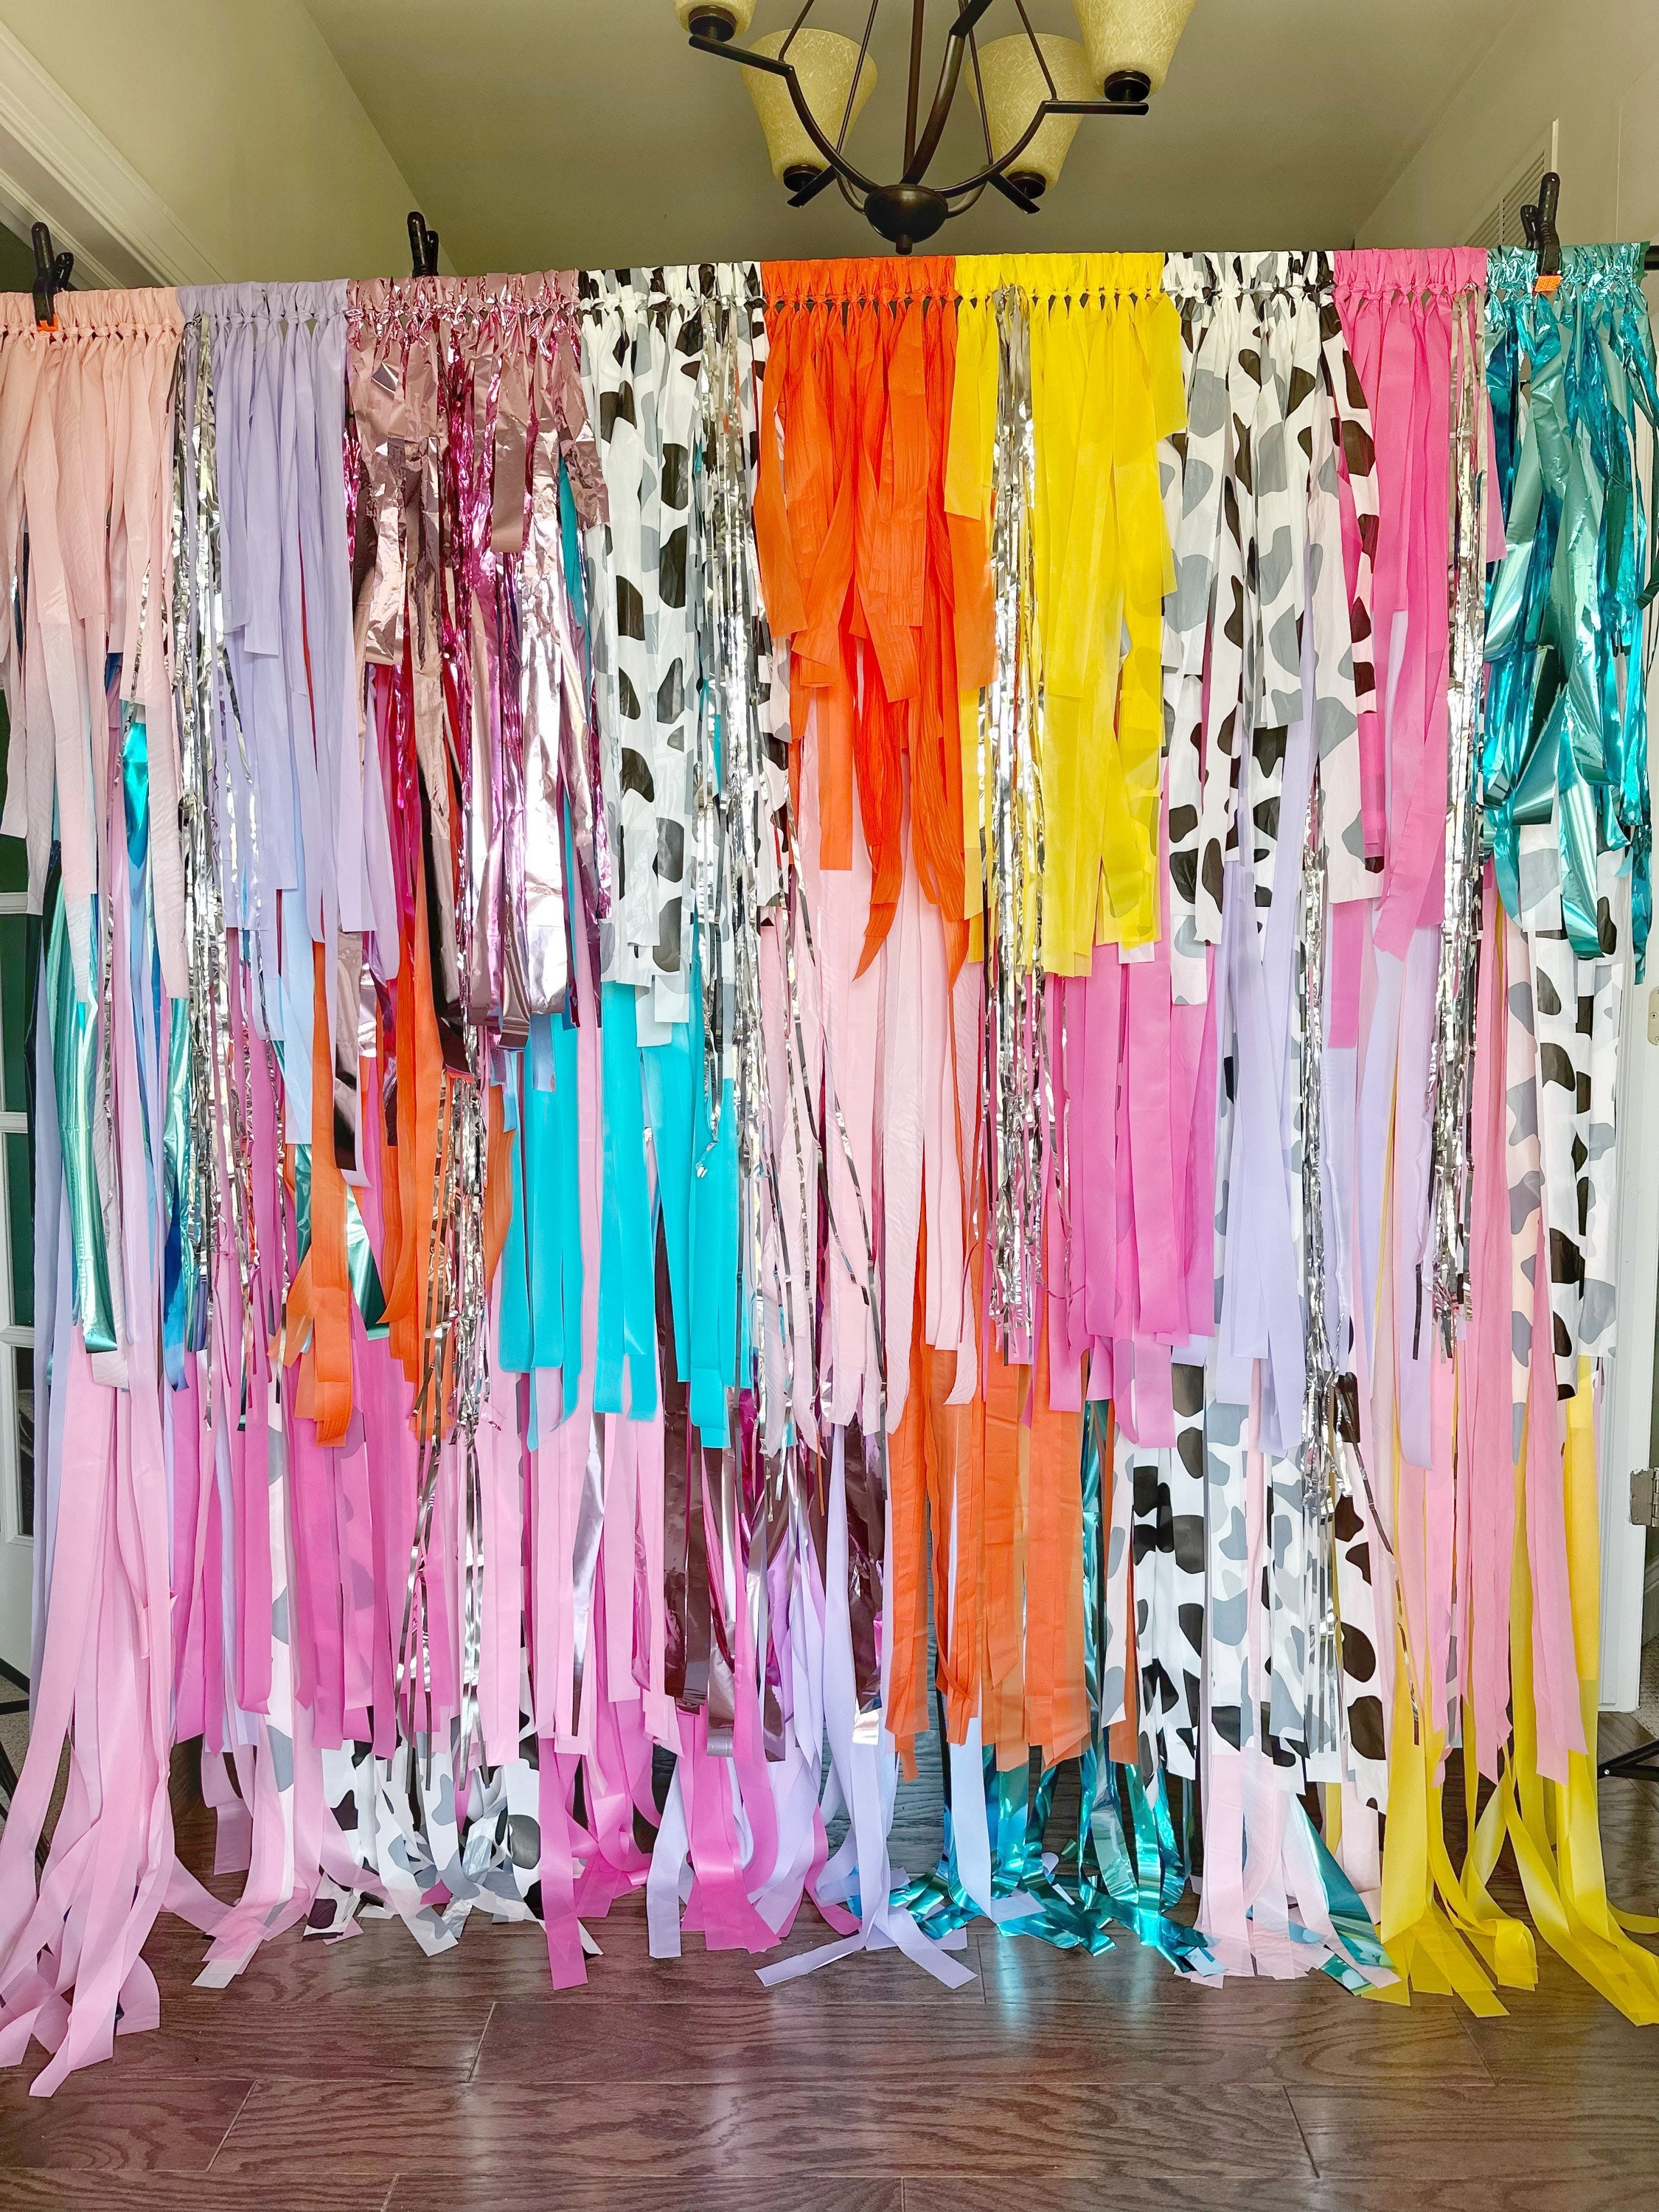 Streamer Backdrop, Fringe Backdrop, Color Birthday Party Decorations, Photo  Backdrop, Fiesta, Bachelorette Party, Pink and Orange 